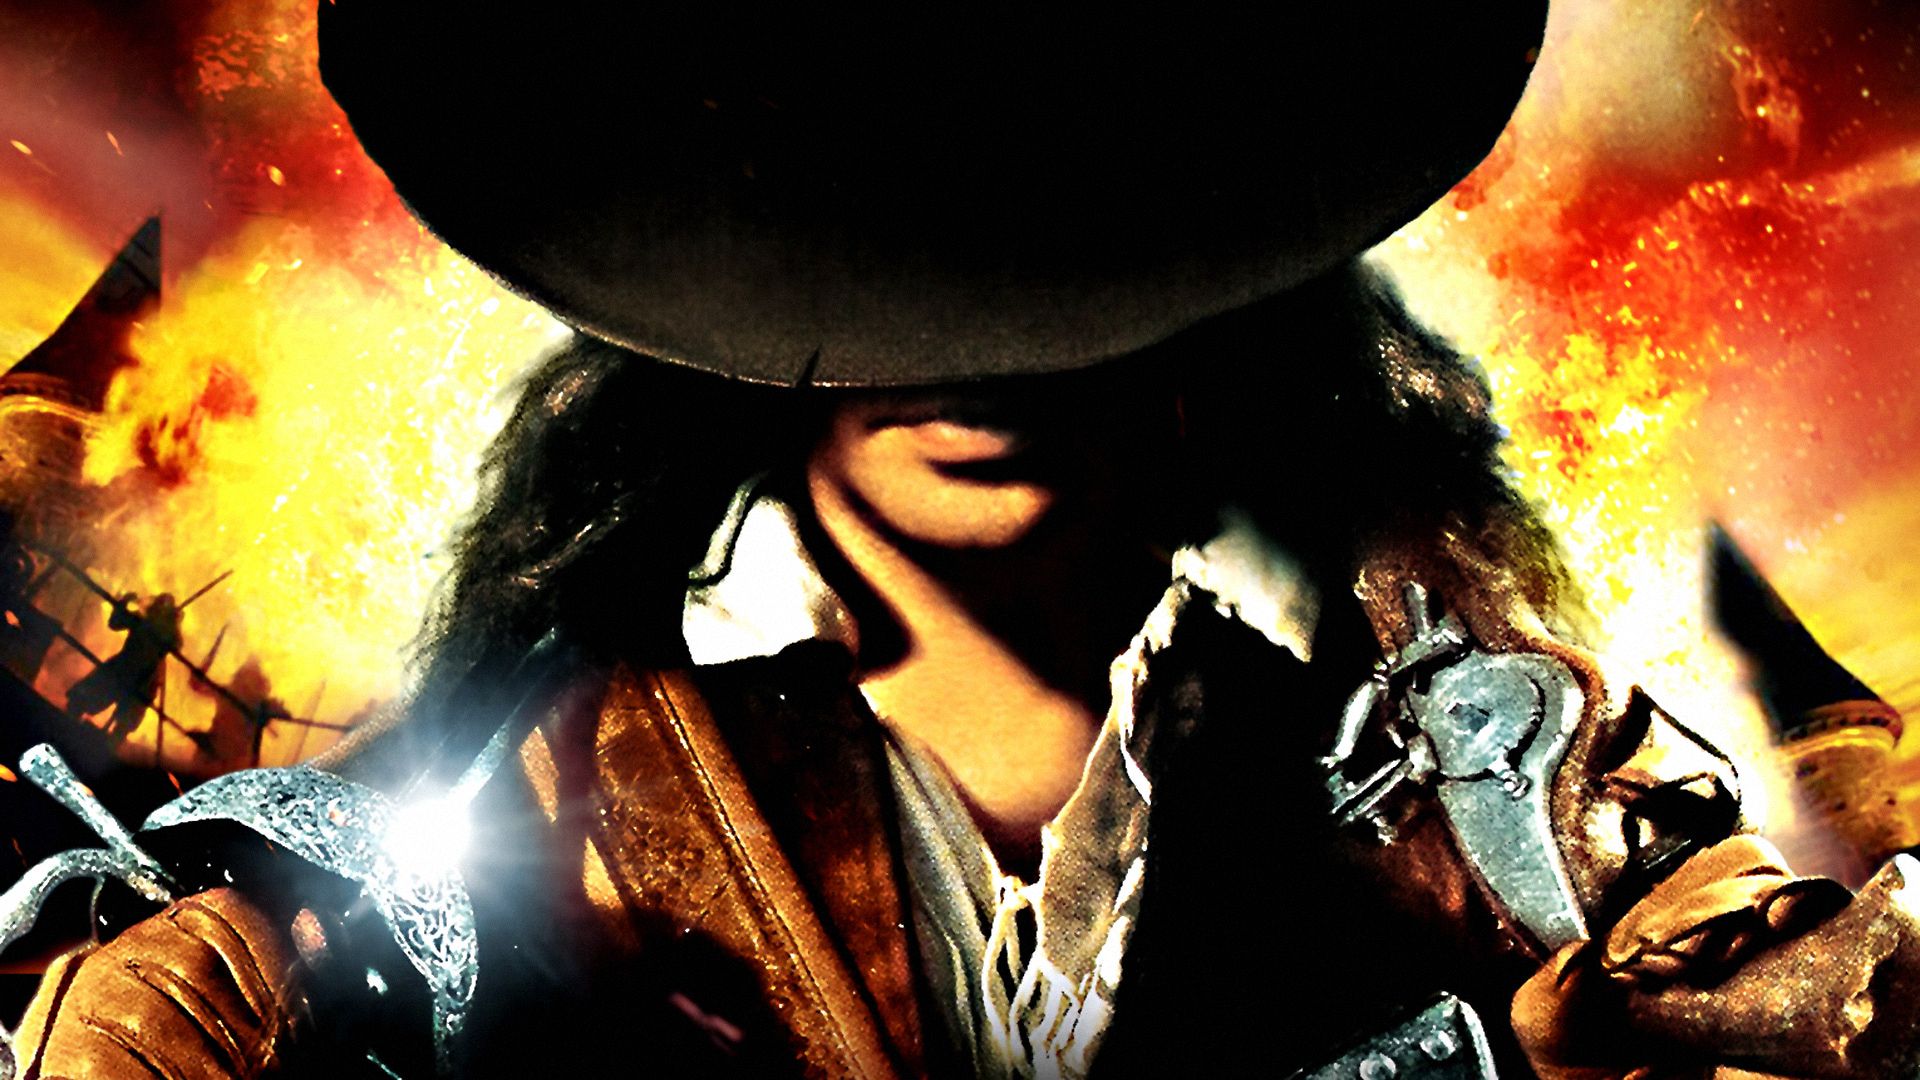 The Musketeer background